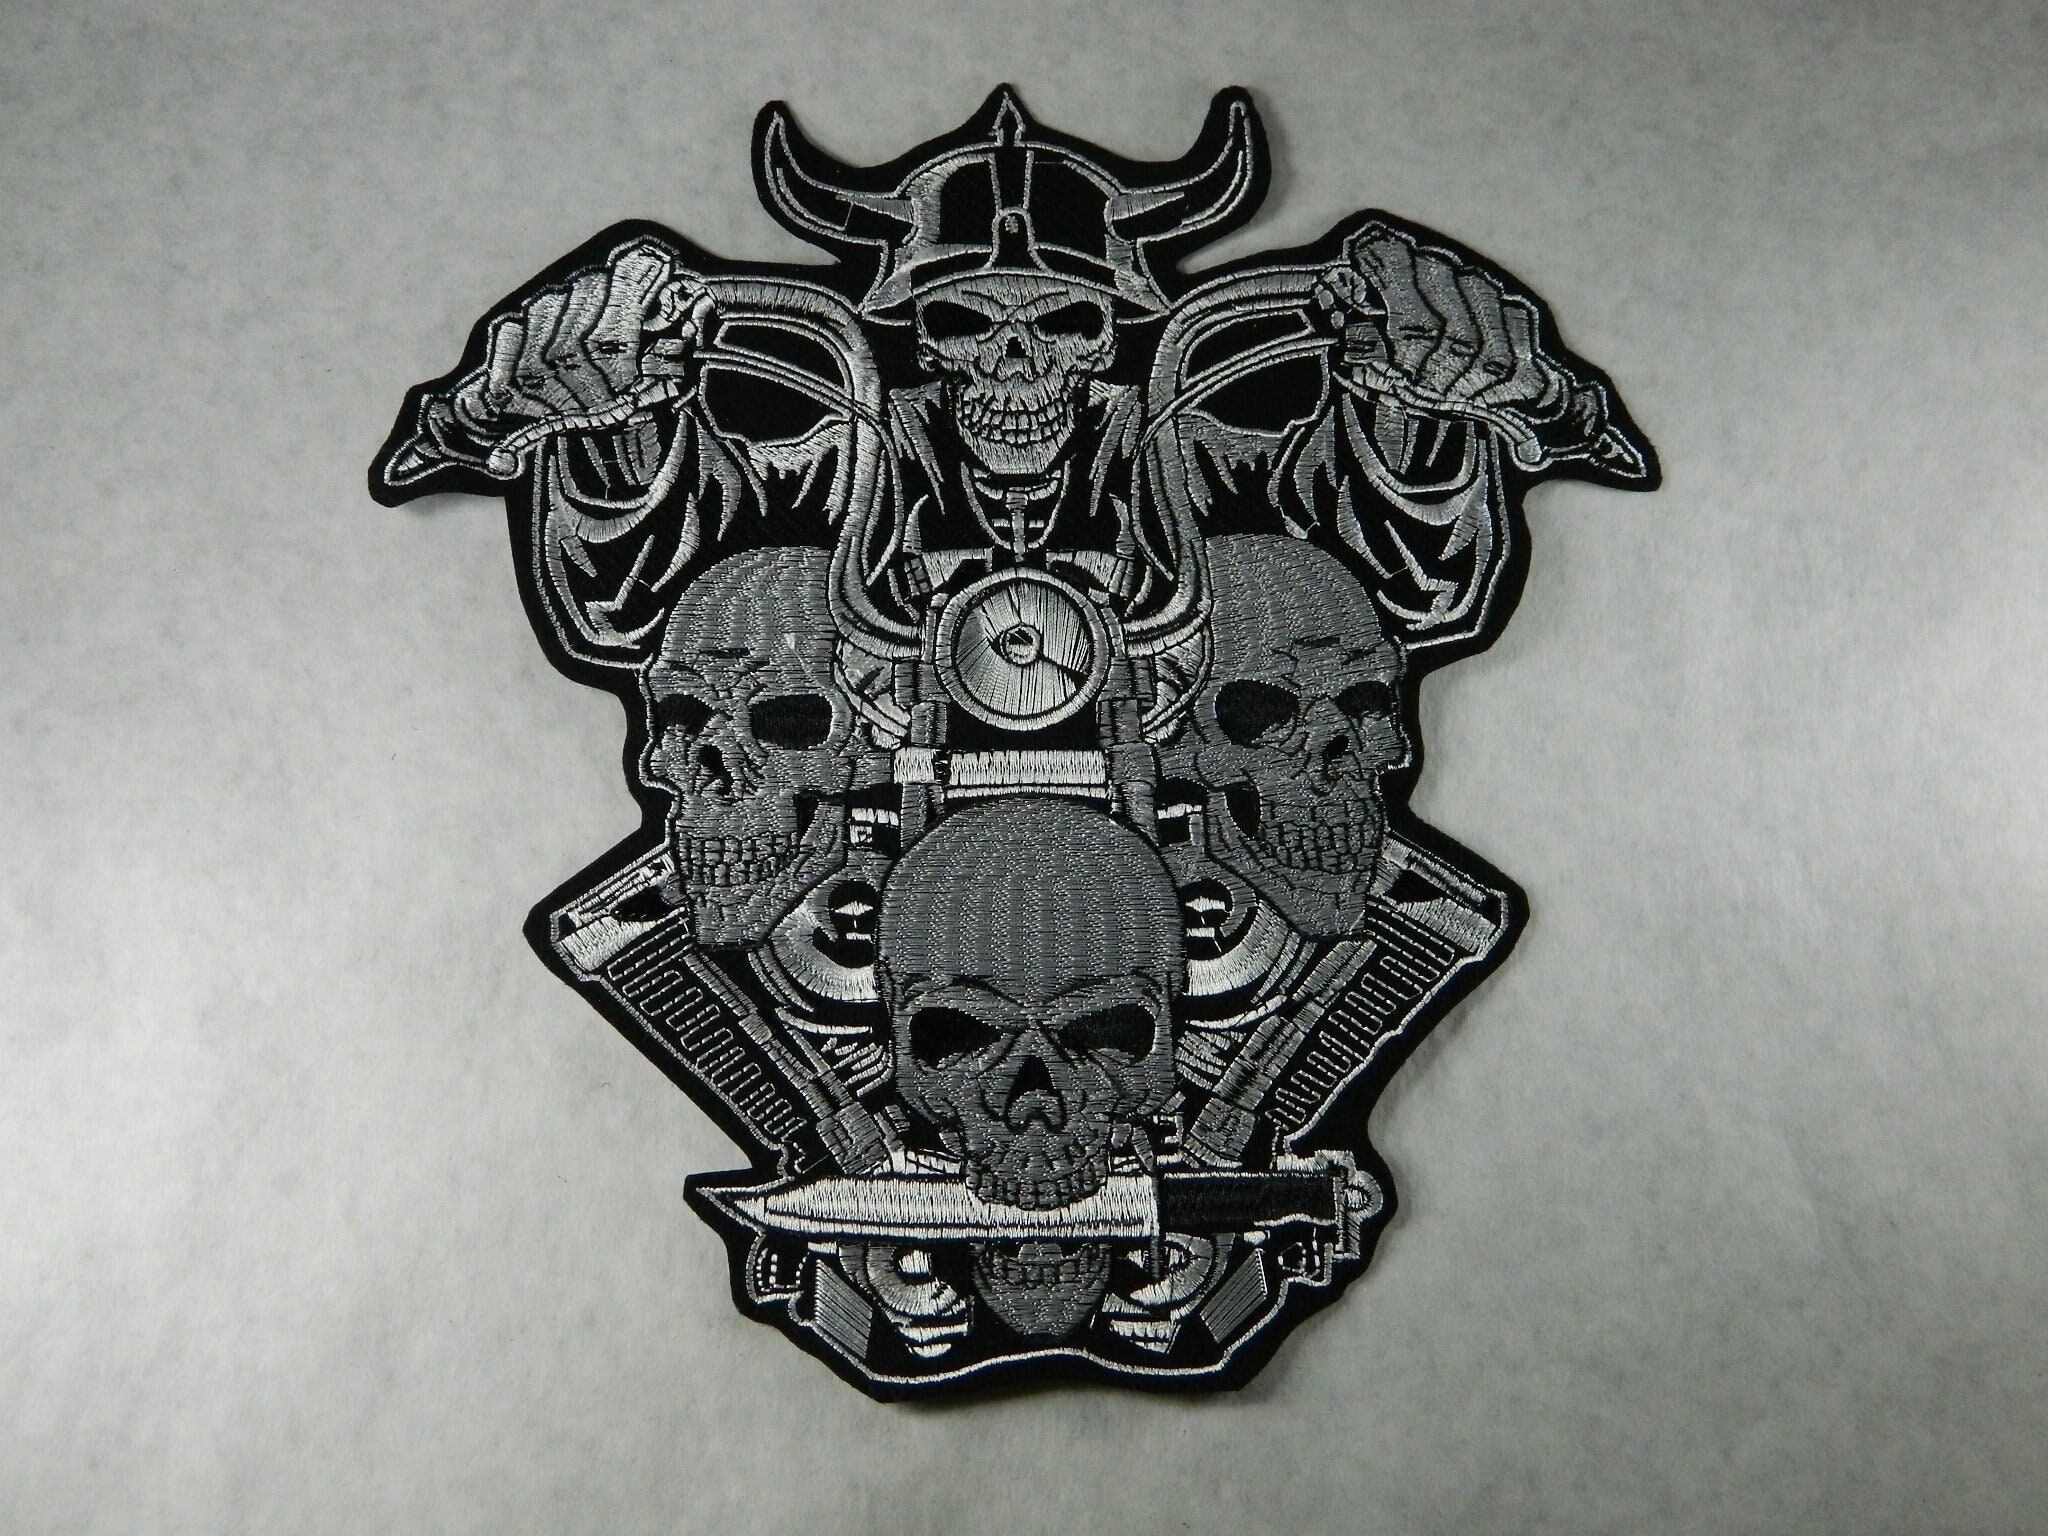 NEW Motorcycle Biker Embroidered Iron On Patches Large Patches For